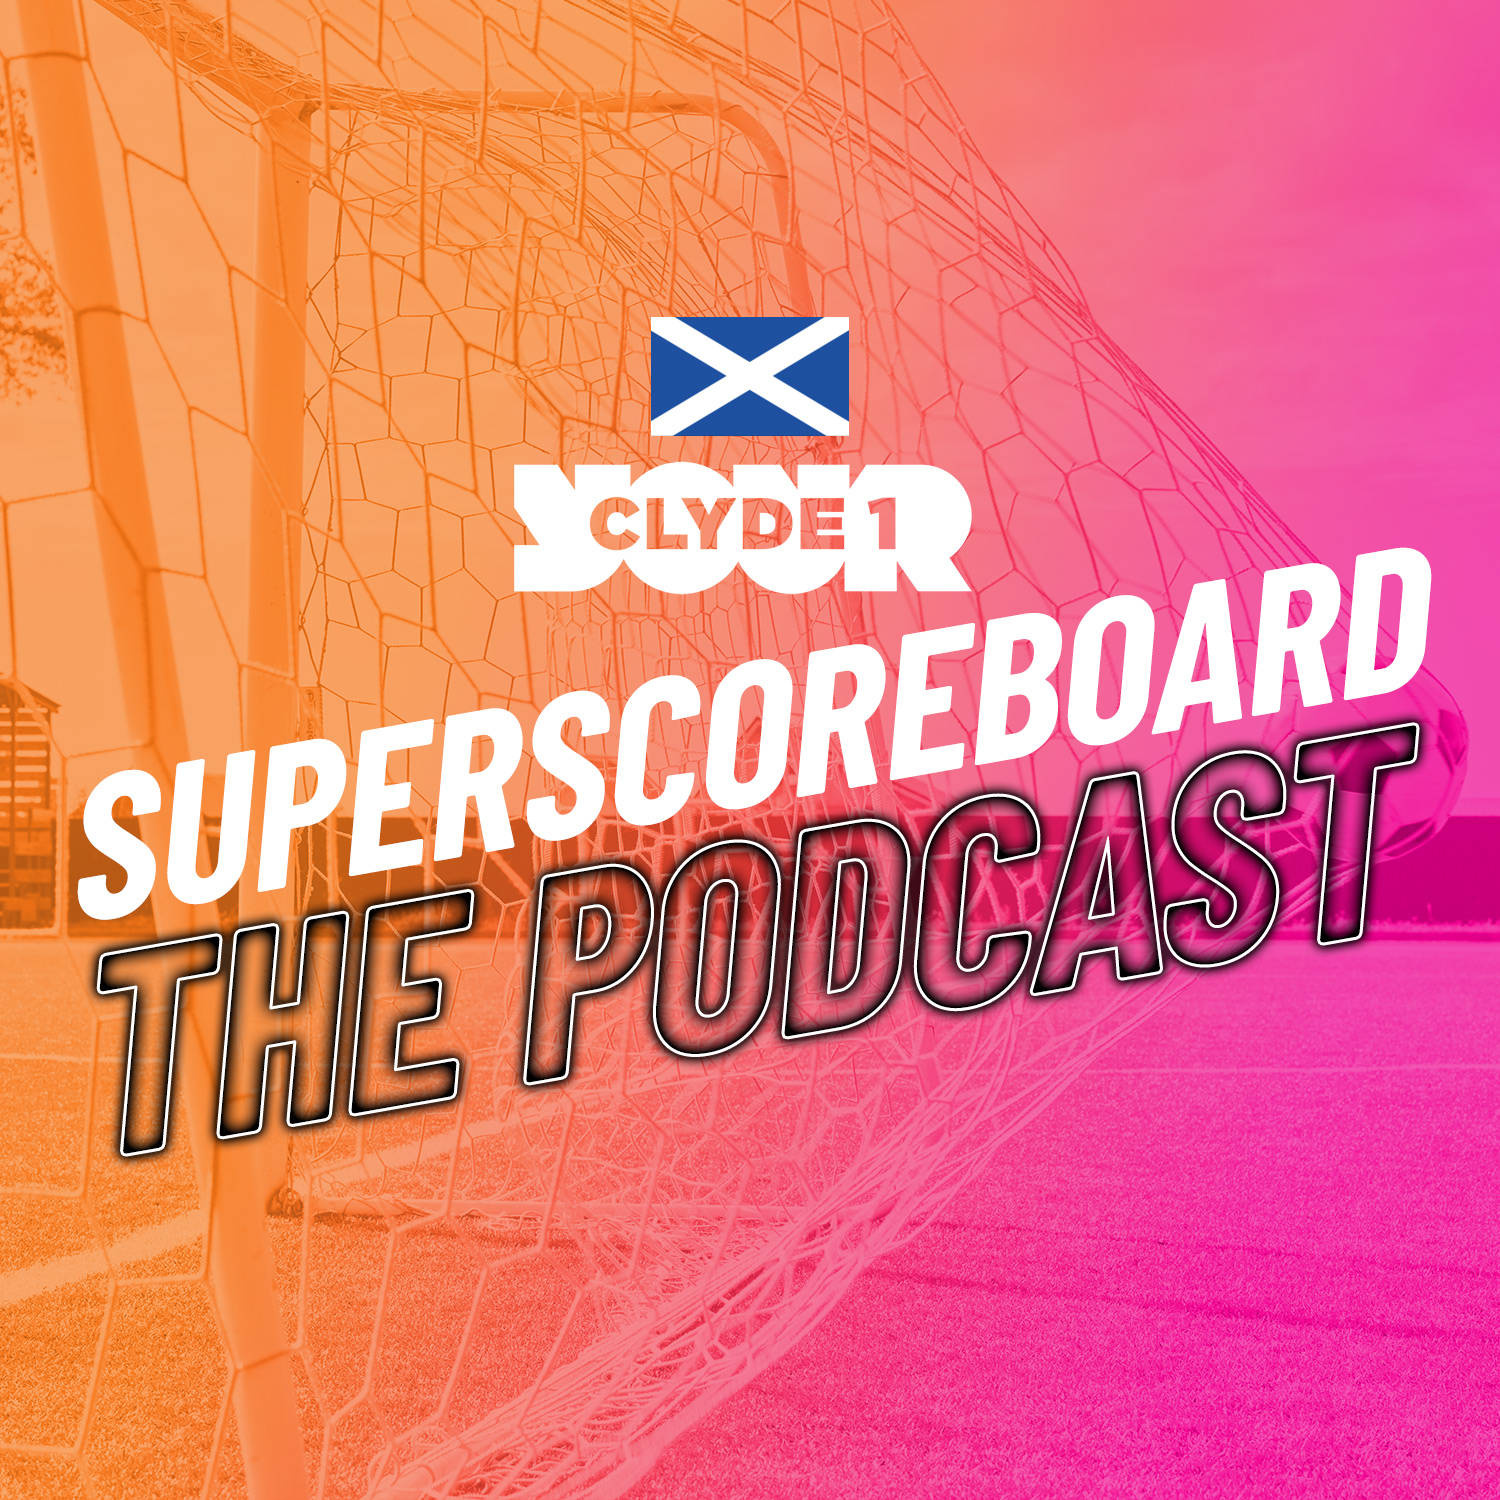 Friday 16th February Clyde 1 Superscoreboard